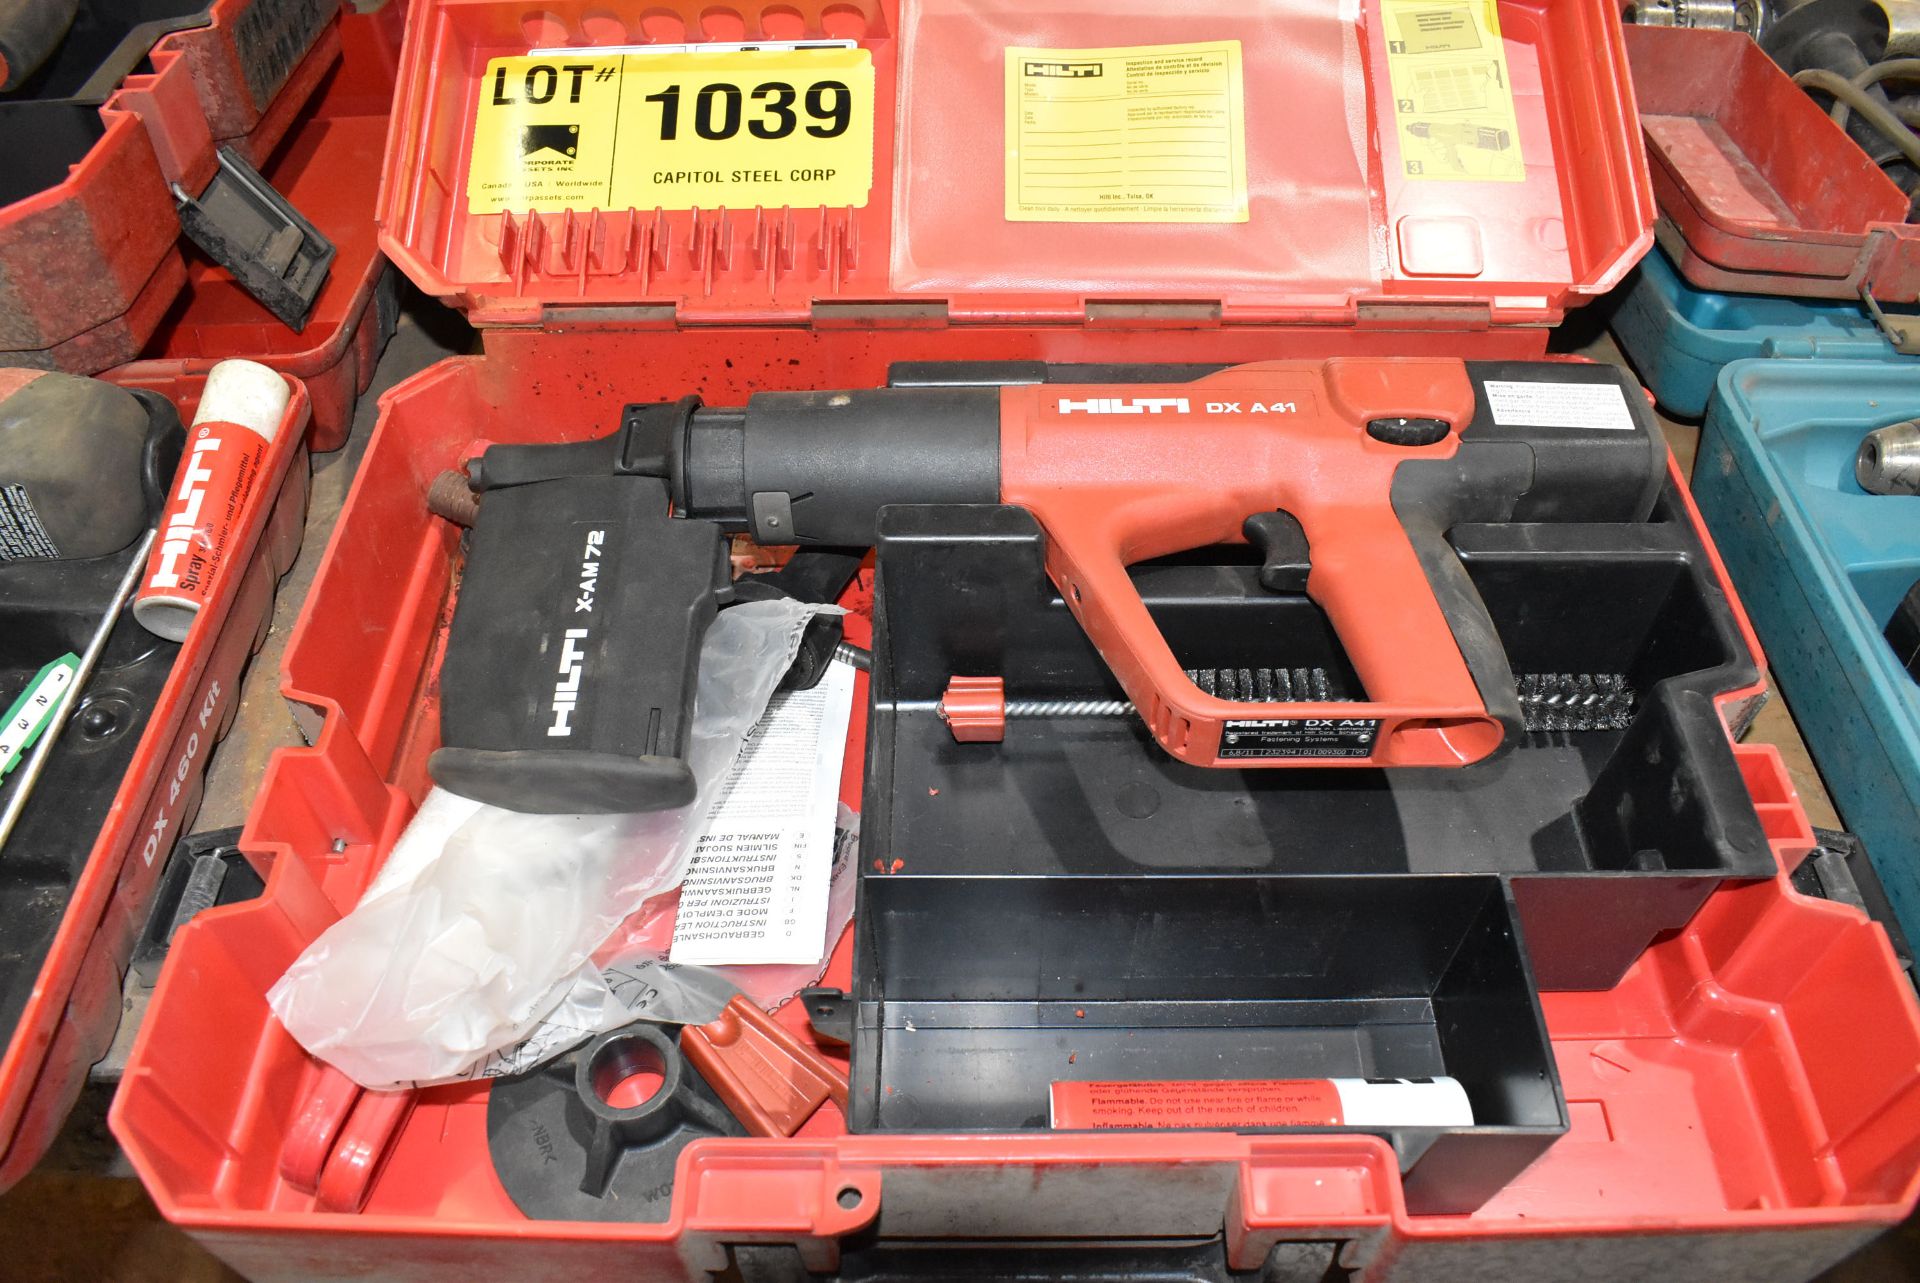 HILTI DX A41 FULLY AUTOMATIC POWER-ACTUATED FASTENING TOOL WITH HILTI X-AM72 NAIL MAGAZINE